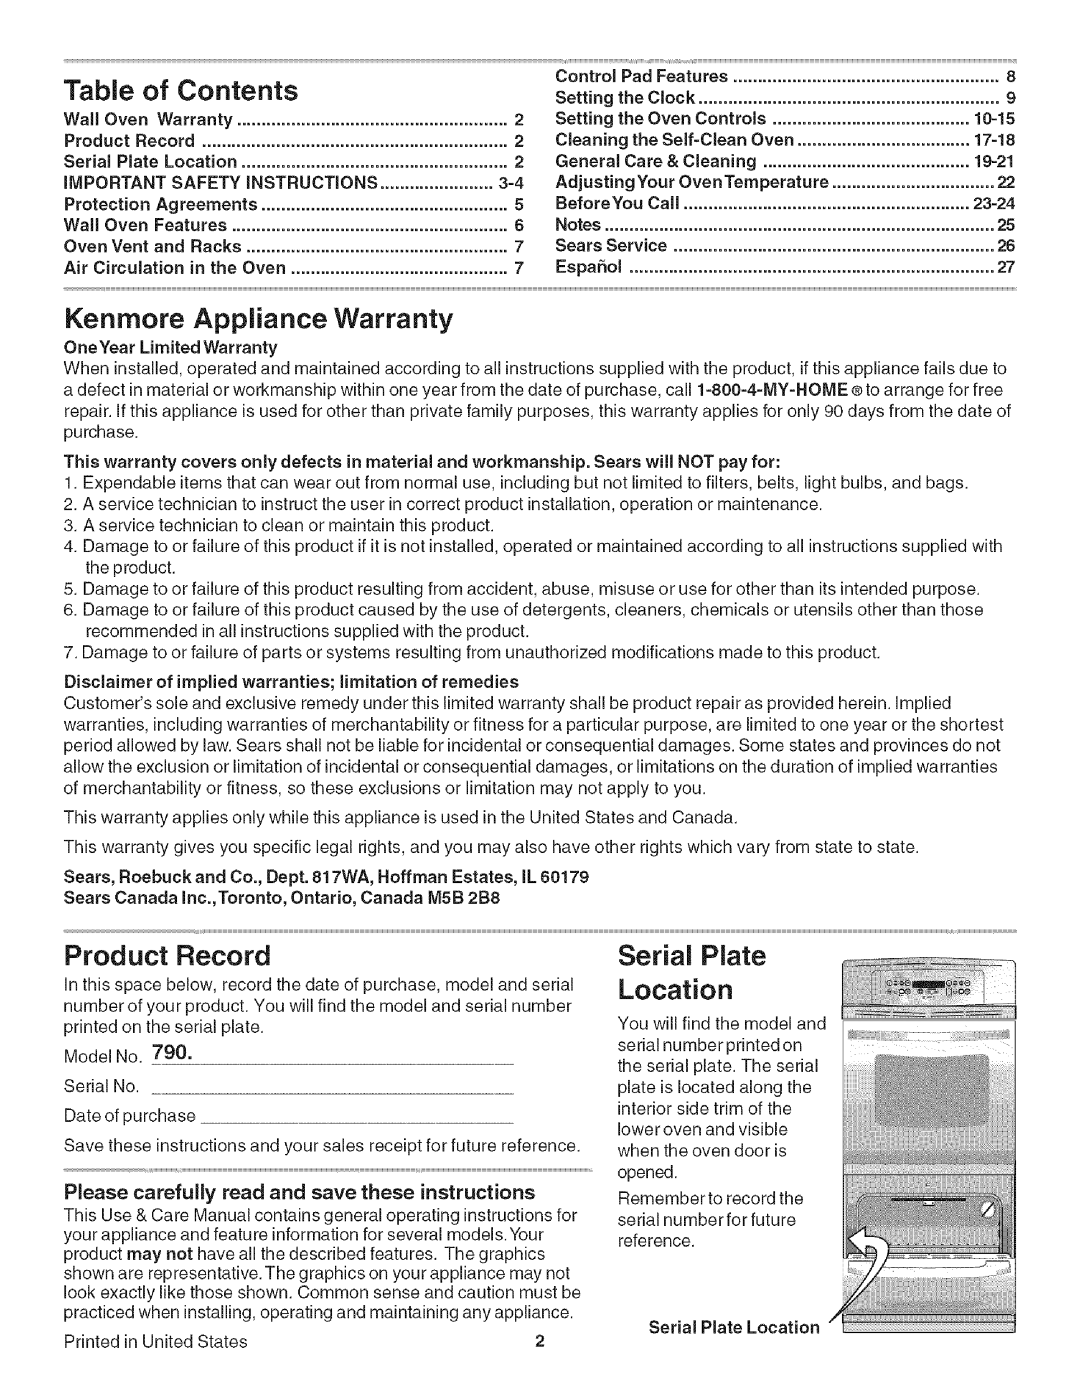 Kenmore 790.4139 manual Contents, Kenmore Appliance Warranty, Product, Record, Serial, Plate, Location, carefully, Please 